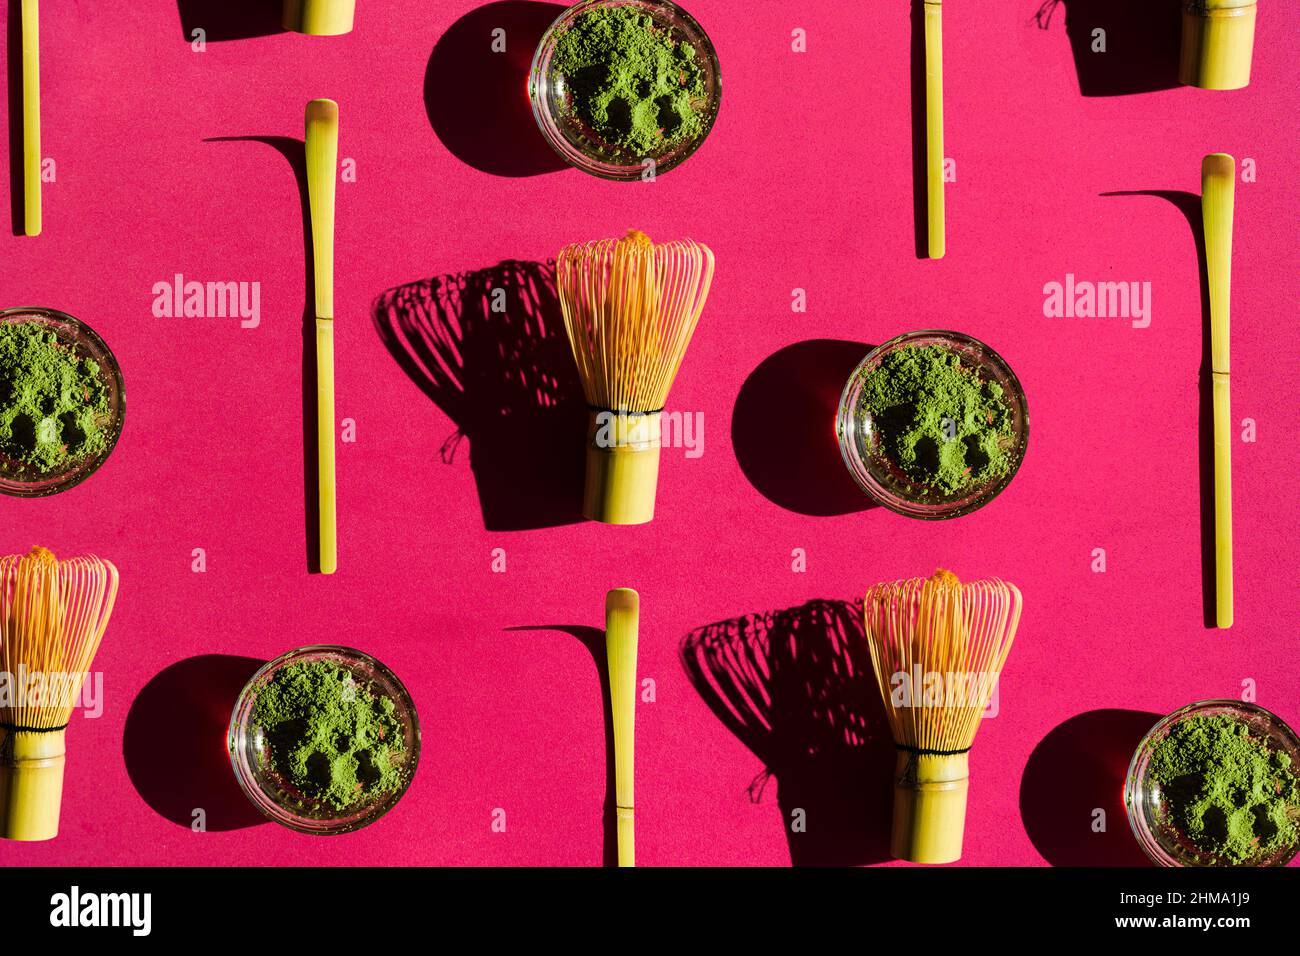 Top view full frame bright background of glass of green tea and dried matcha with bamboo chasen and chashaku on pink surface Stock Photo